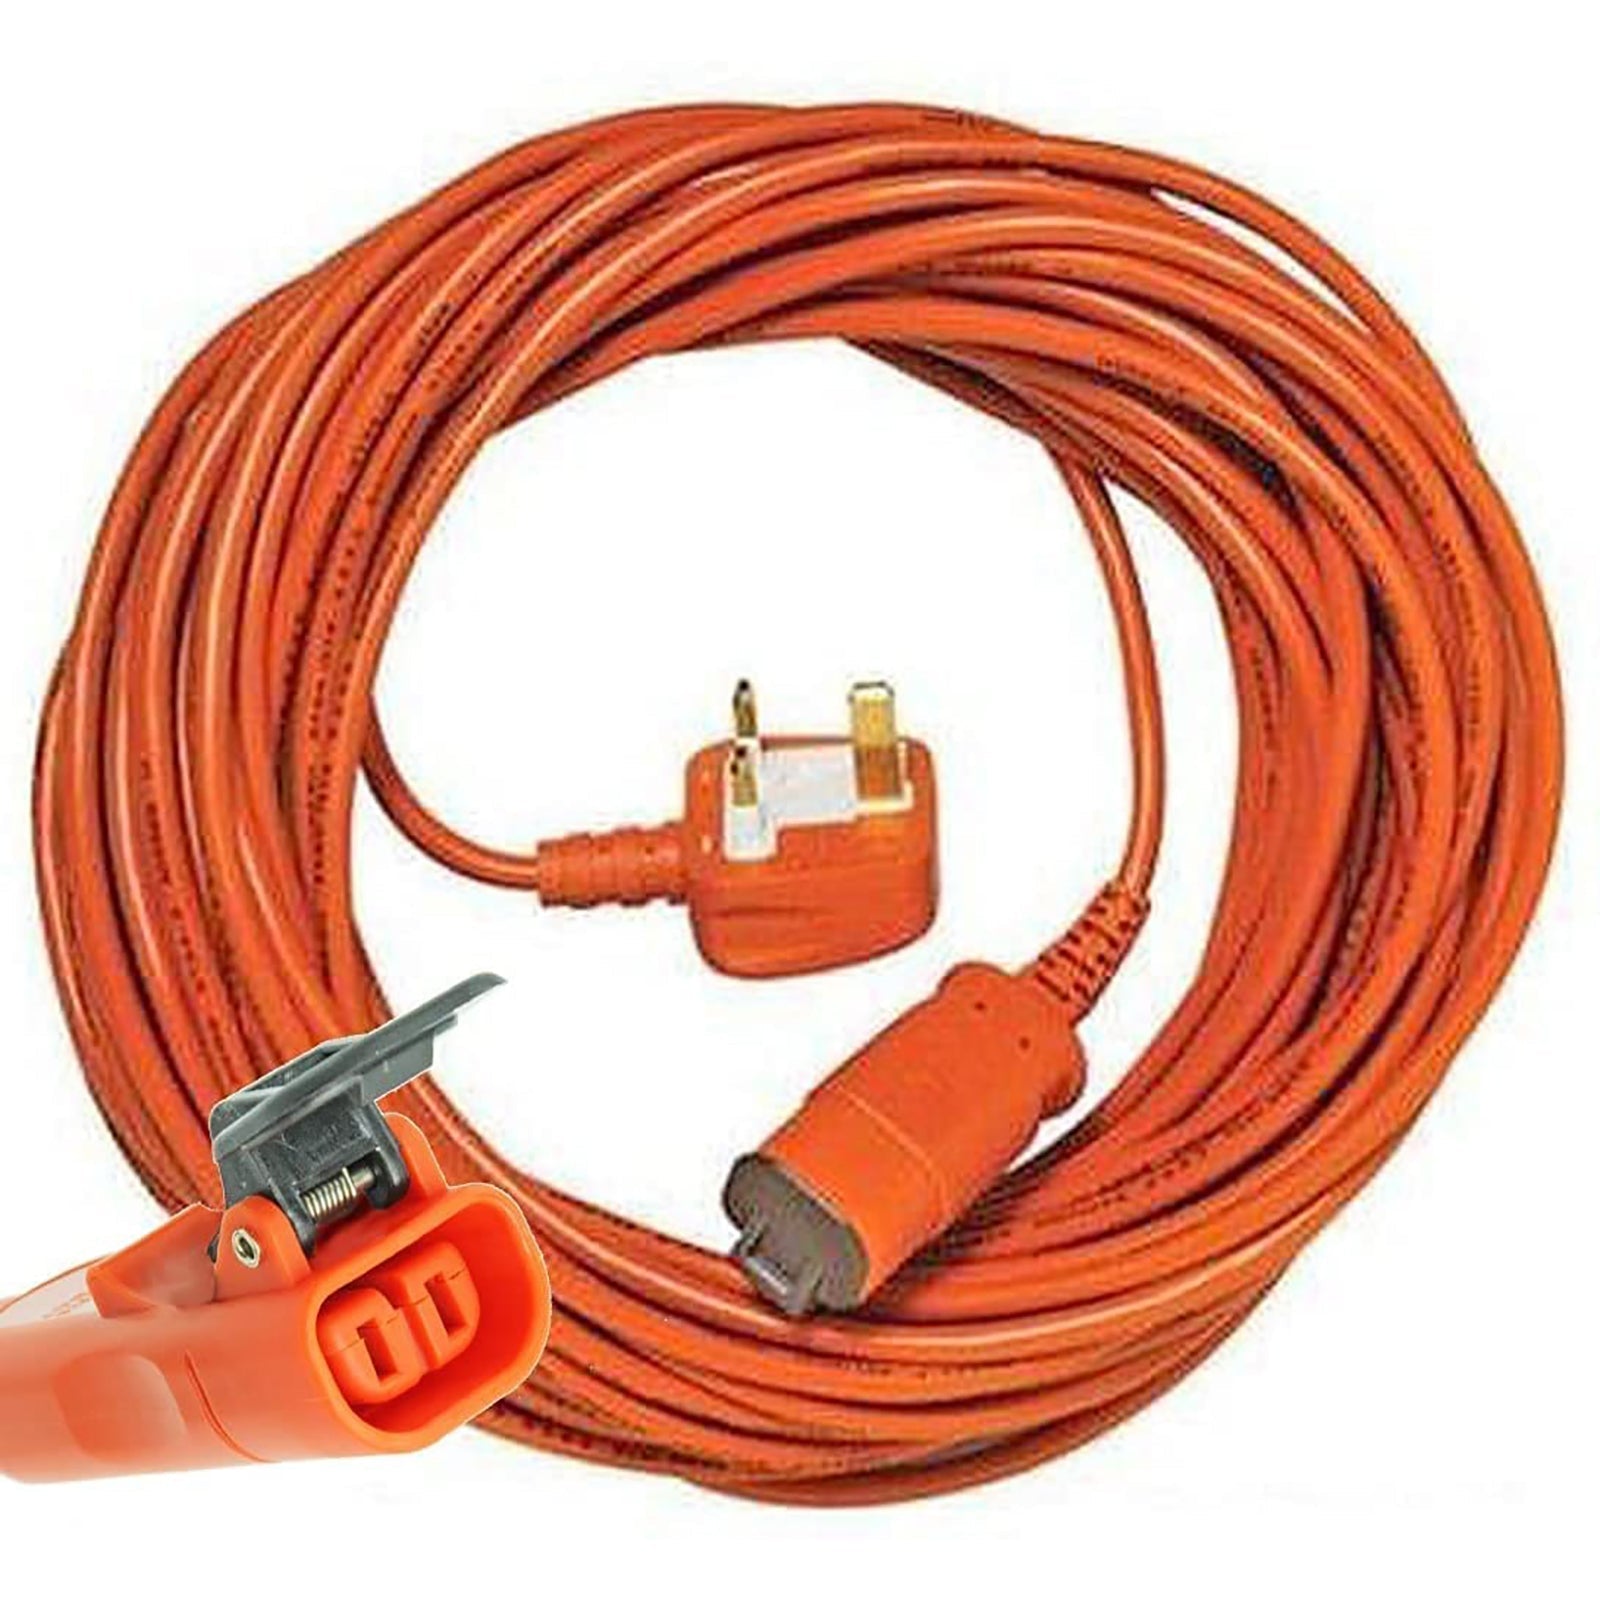 Cable for Flymo Lawnmower Hover Compact 300 330 350 Hedge Trimmer Metre Lead Plug (15m)